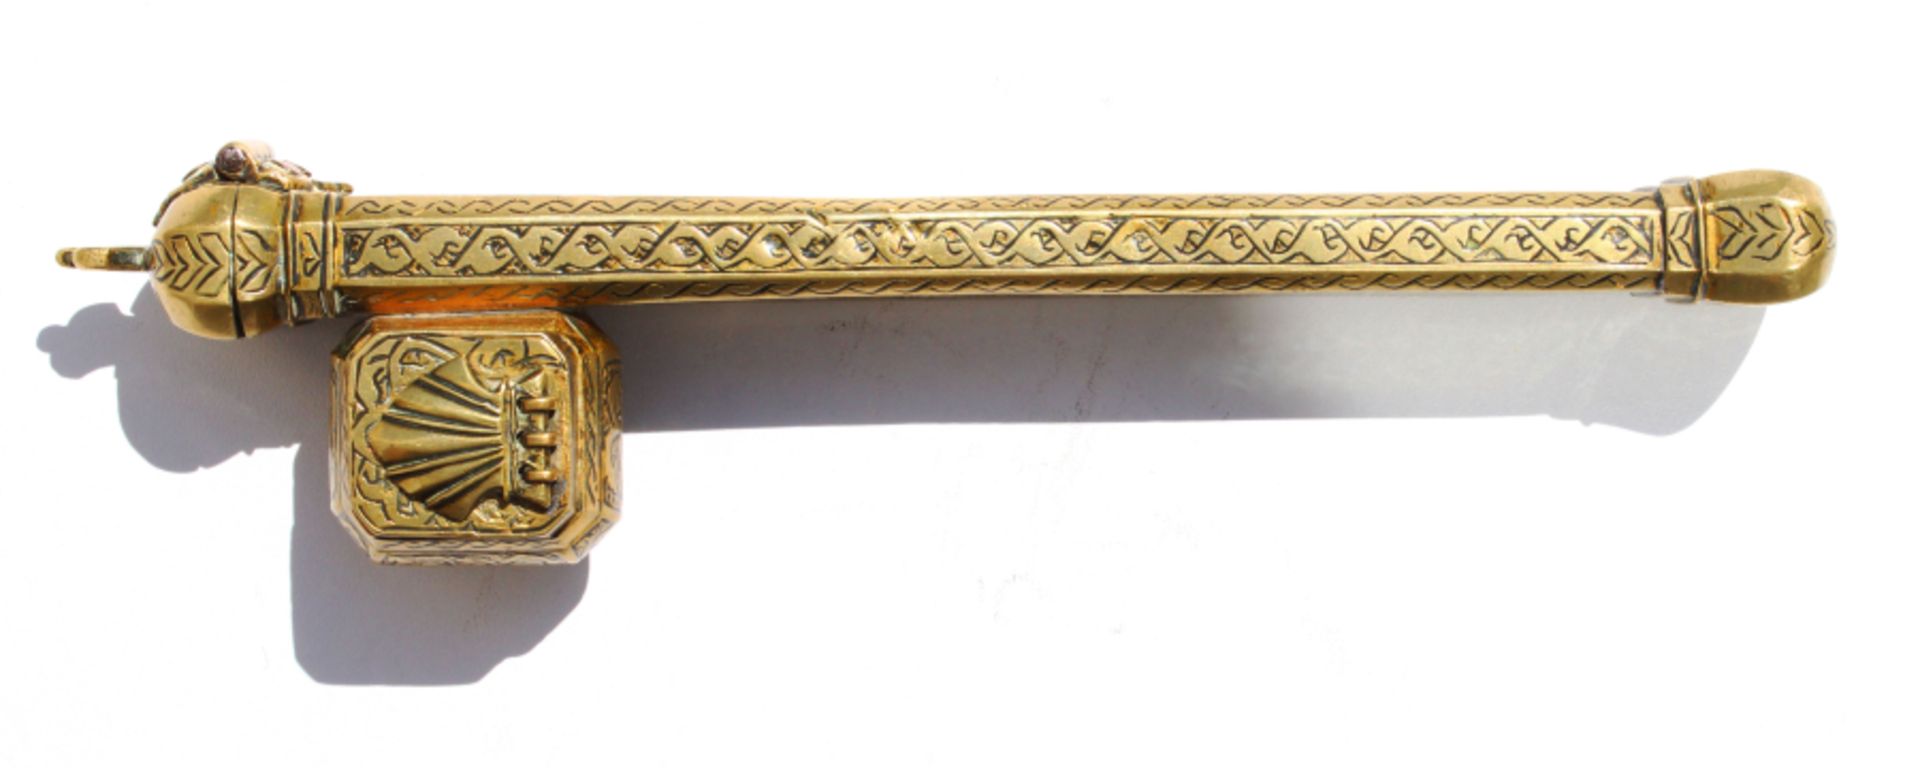 Ottoman brass pen case with inkwell - Image 8 of 12